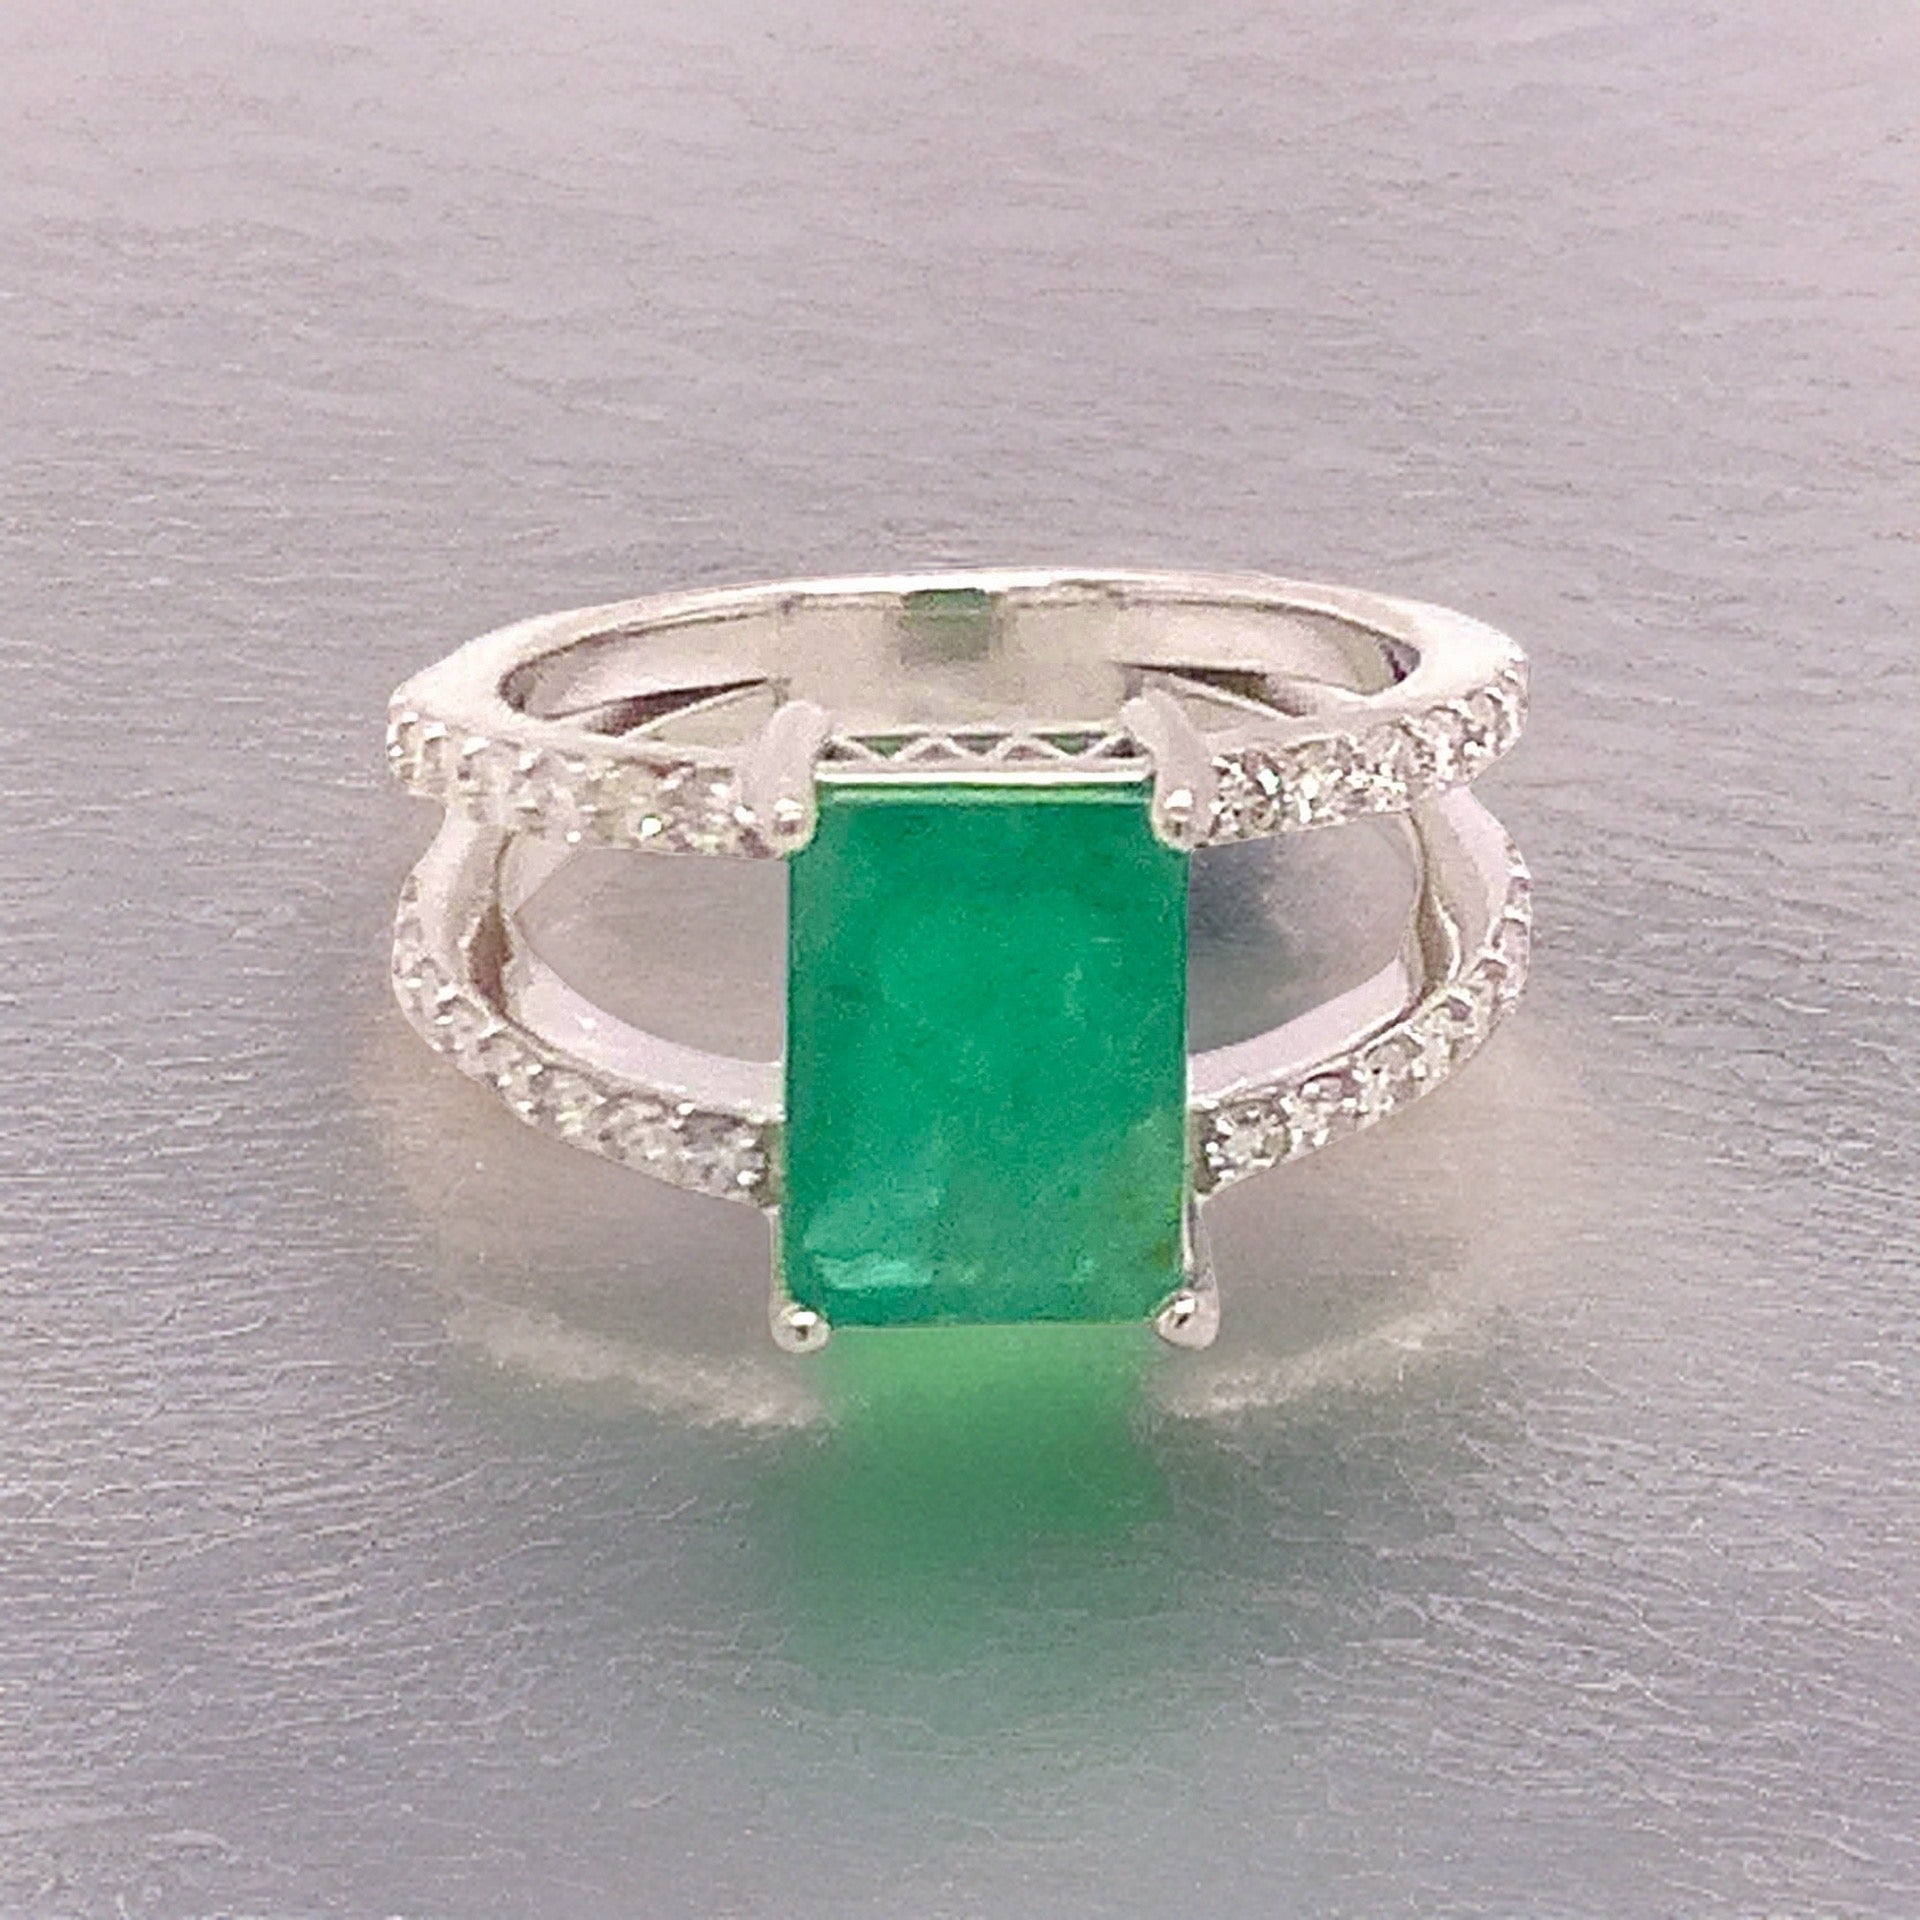 Natural Emerald Diamond Ring 14k Gold 2.85 TCW Size 7 Certified $5,970 111873 - Certified Fine Jewelry